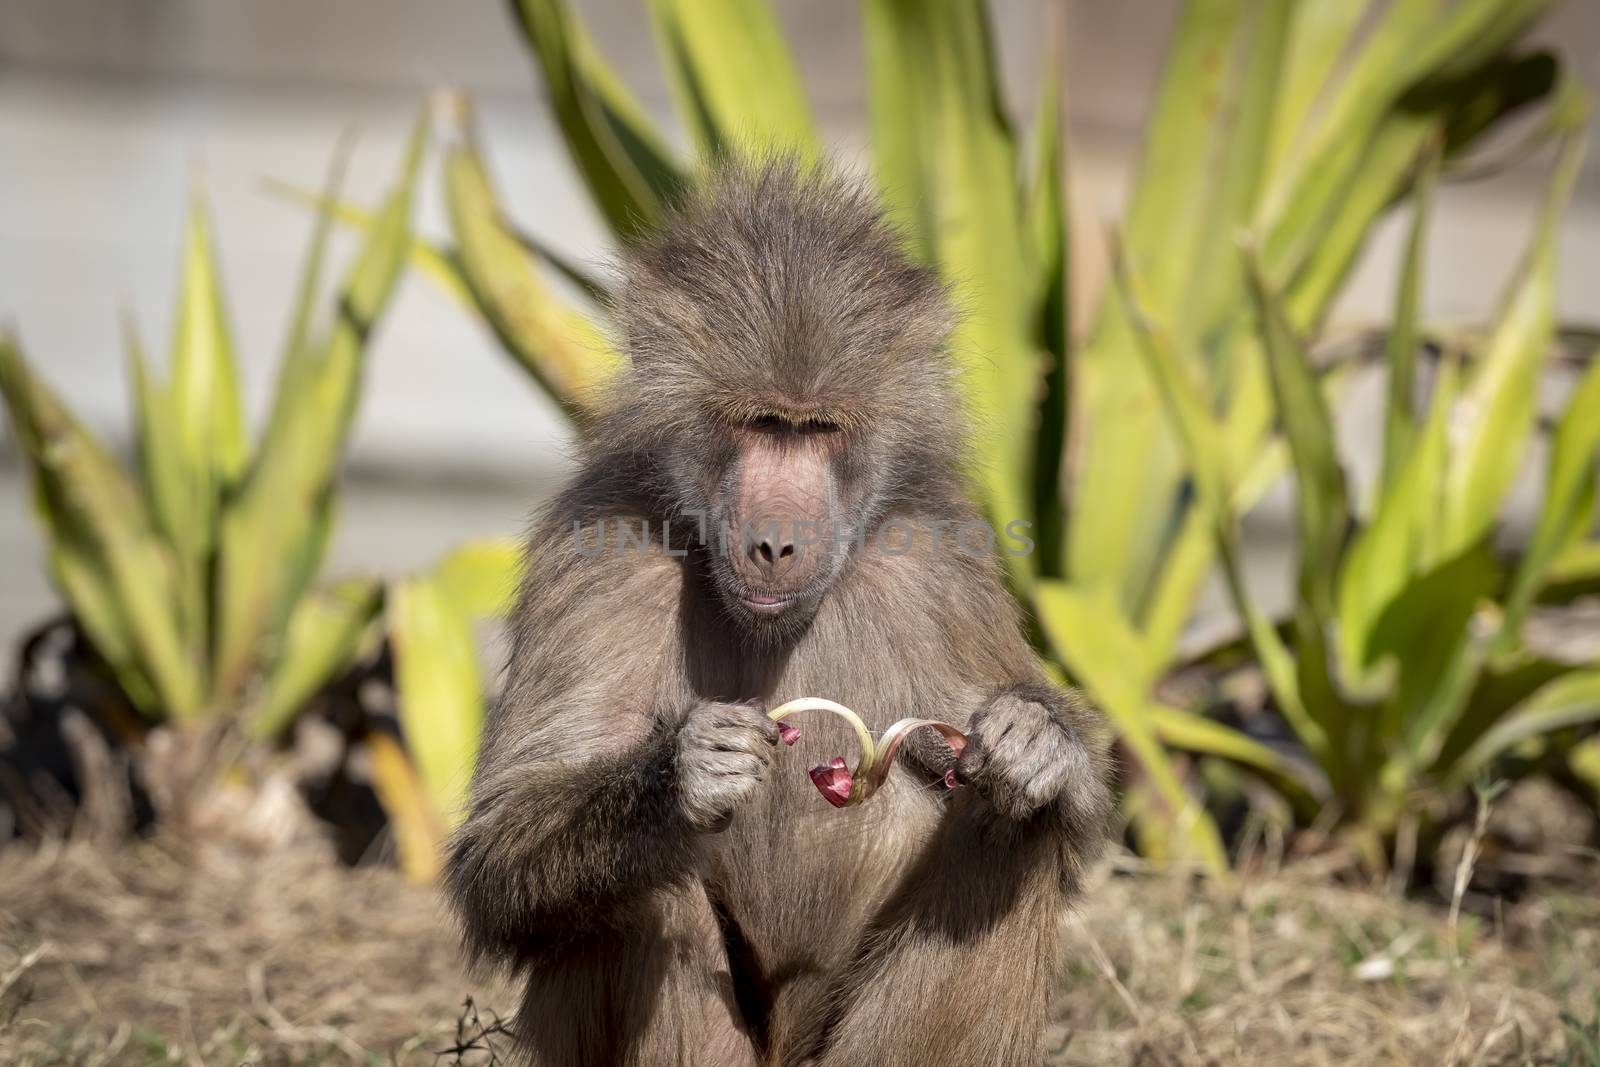 An adolescent Hamadryas Baboon eating food in the outdoors by WittkePhotos